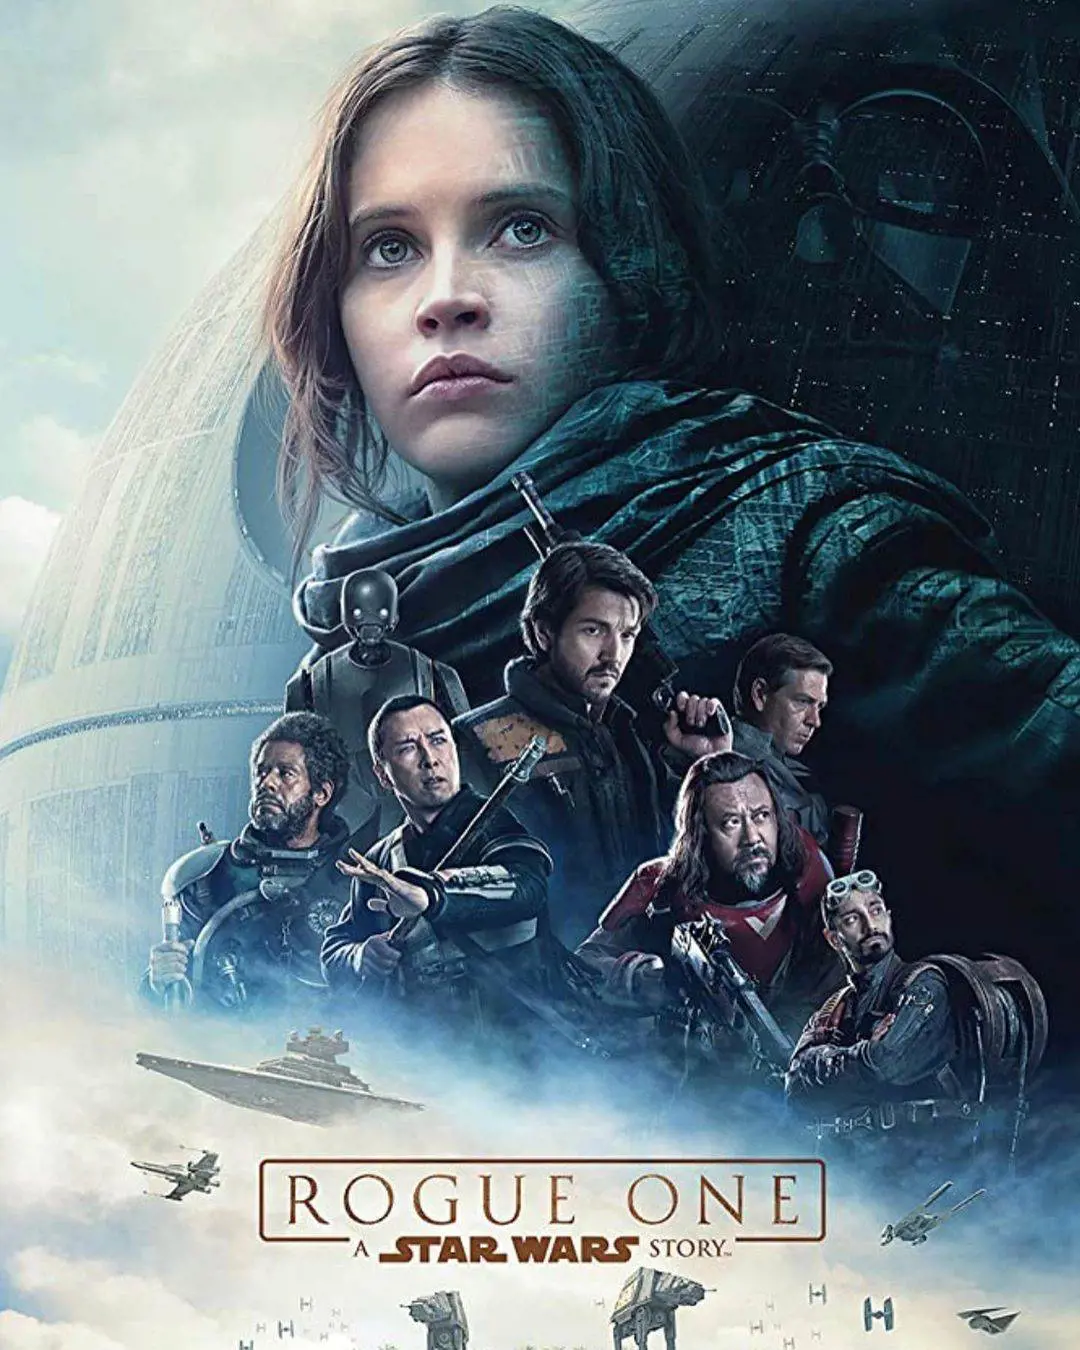 Rogue One - A Star Wars Story is the first installment of the Star Wars anthology series, and an immediate prequel to Star Wars (1977)